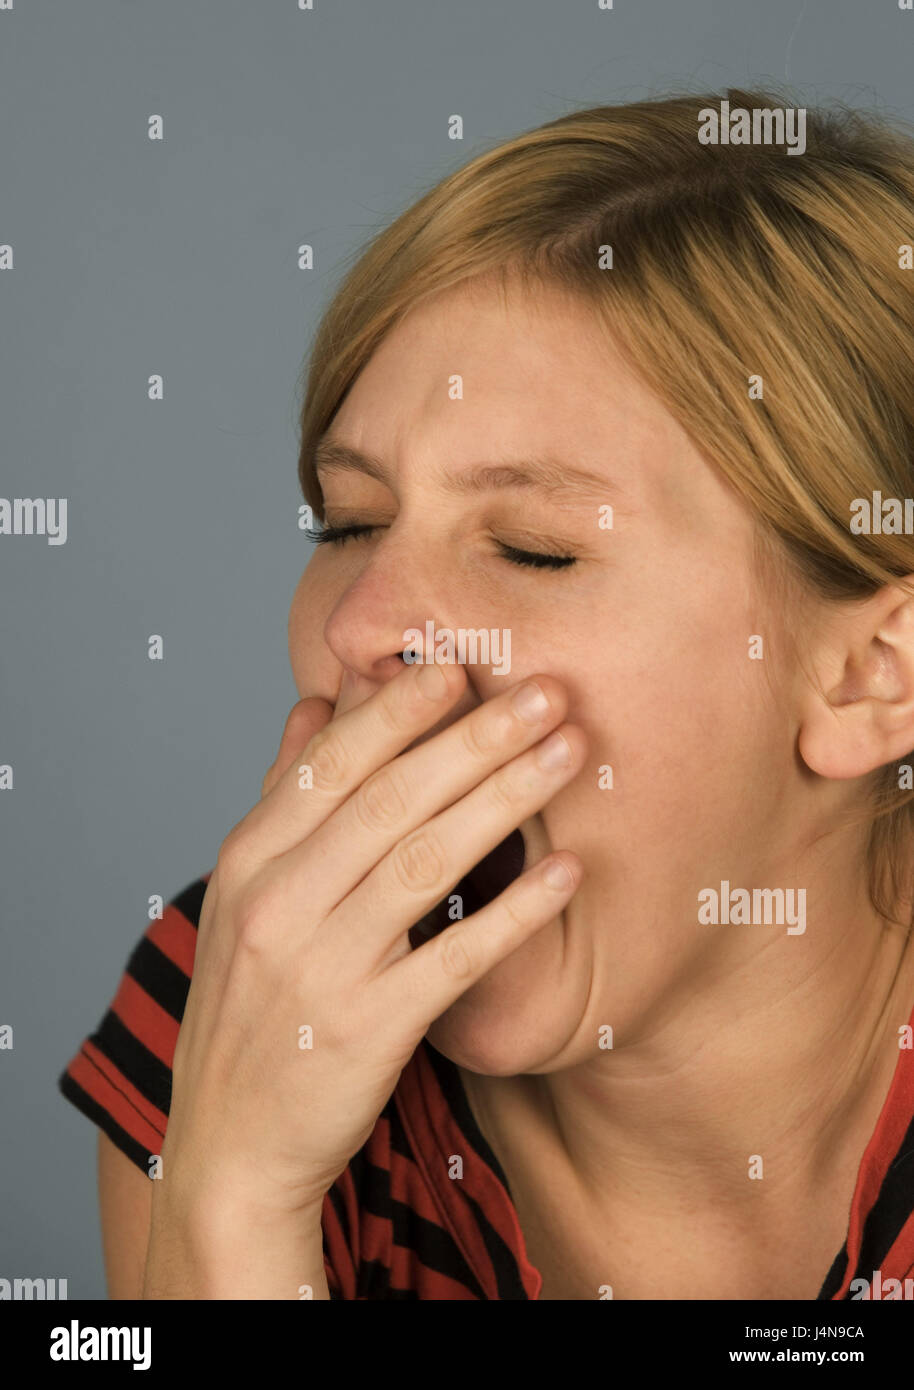 Woman, young, yawn, with hand, reproach, portrait, curled, people, young persons, blond, tiredly, fatigue, depletion, erodedly, drawn, rewrite, unslept off, oxygen starvation, studio, inside, icon, decency, behaviour, Stock Photo